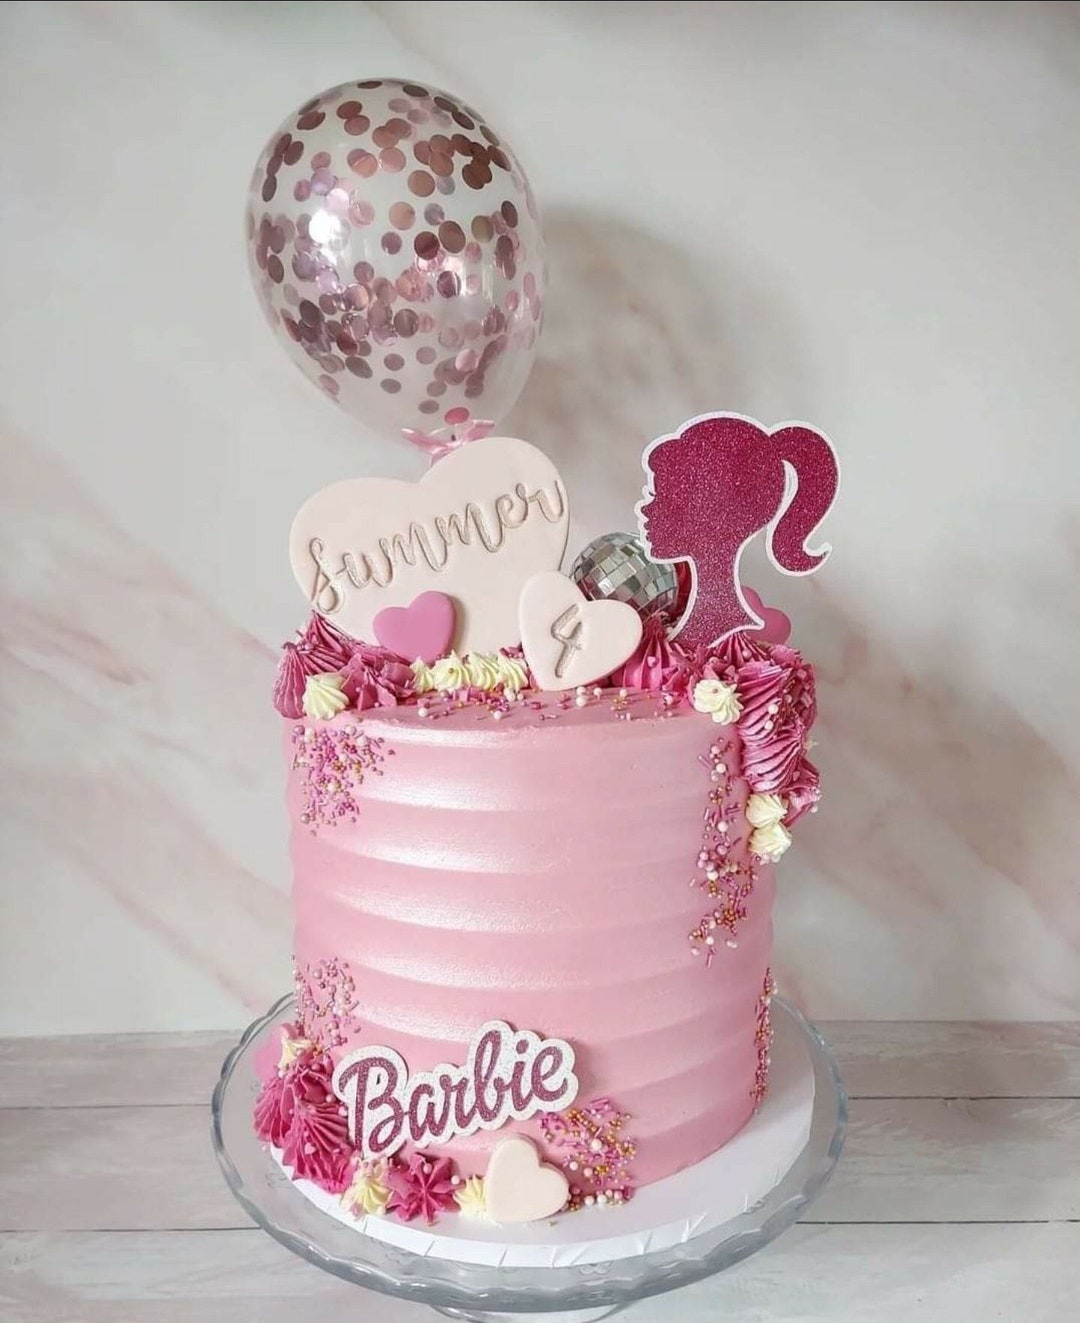 Barbie cake - Theme cakes for Kids by Kukkr Cakes